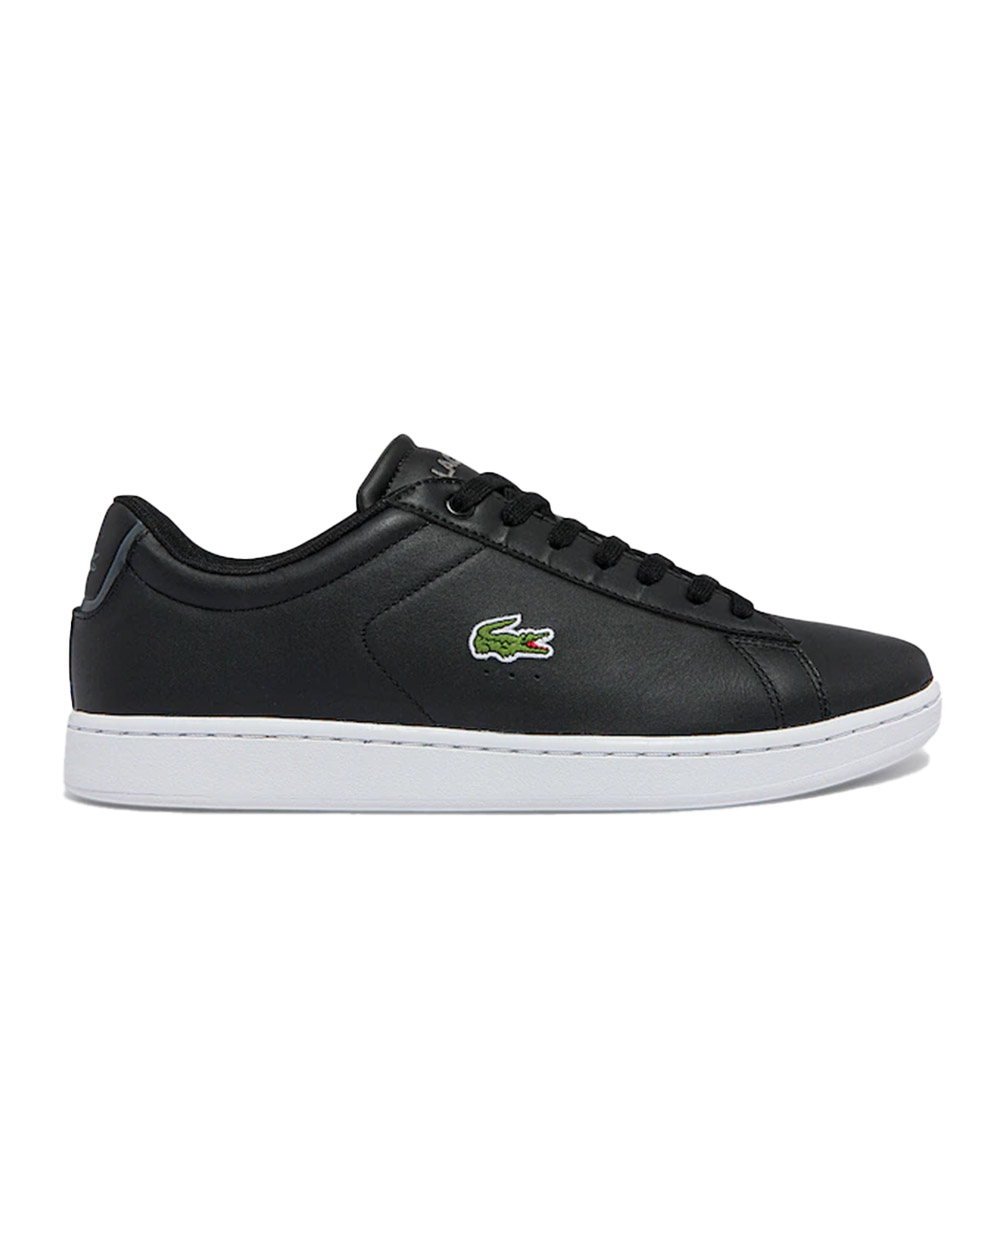 Lacoste Carnaby BL21 1 SMA (black/white)